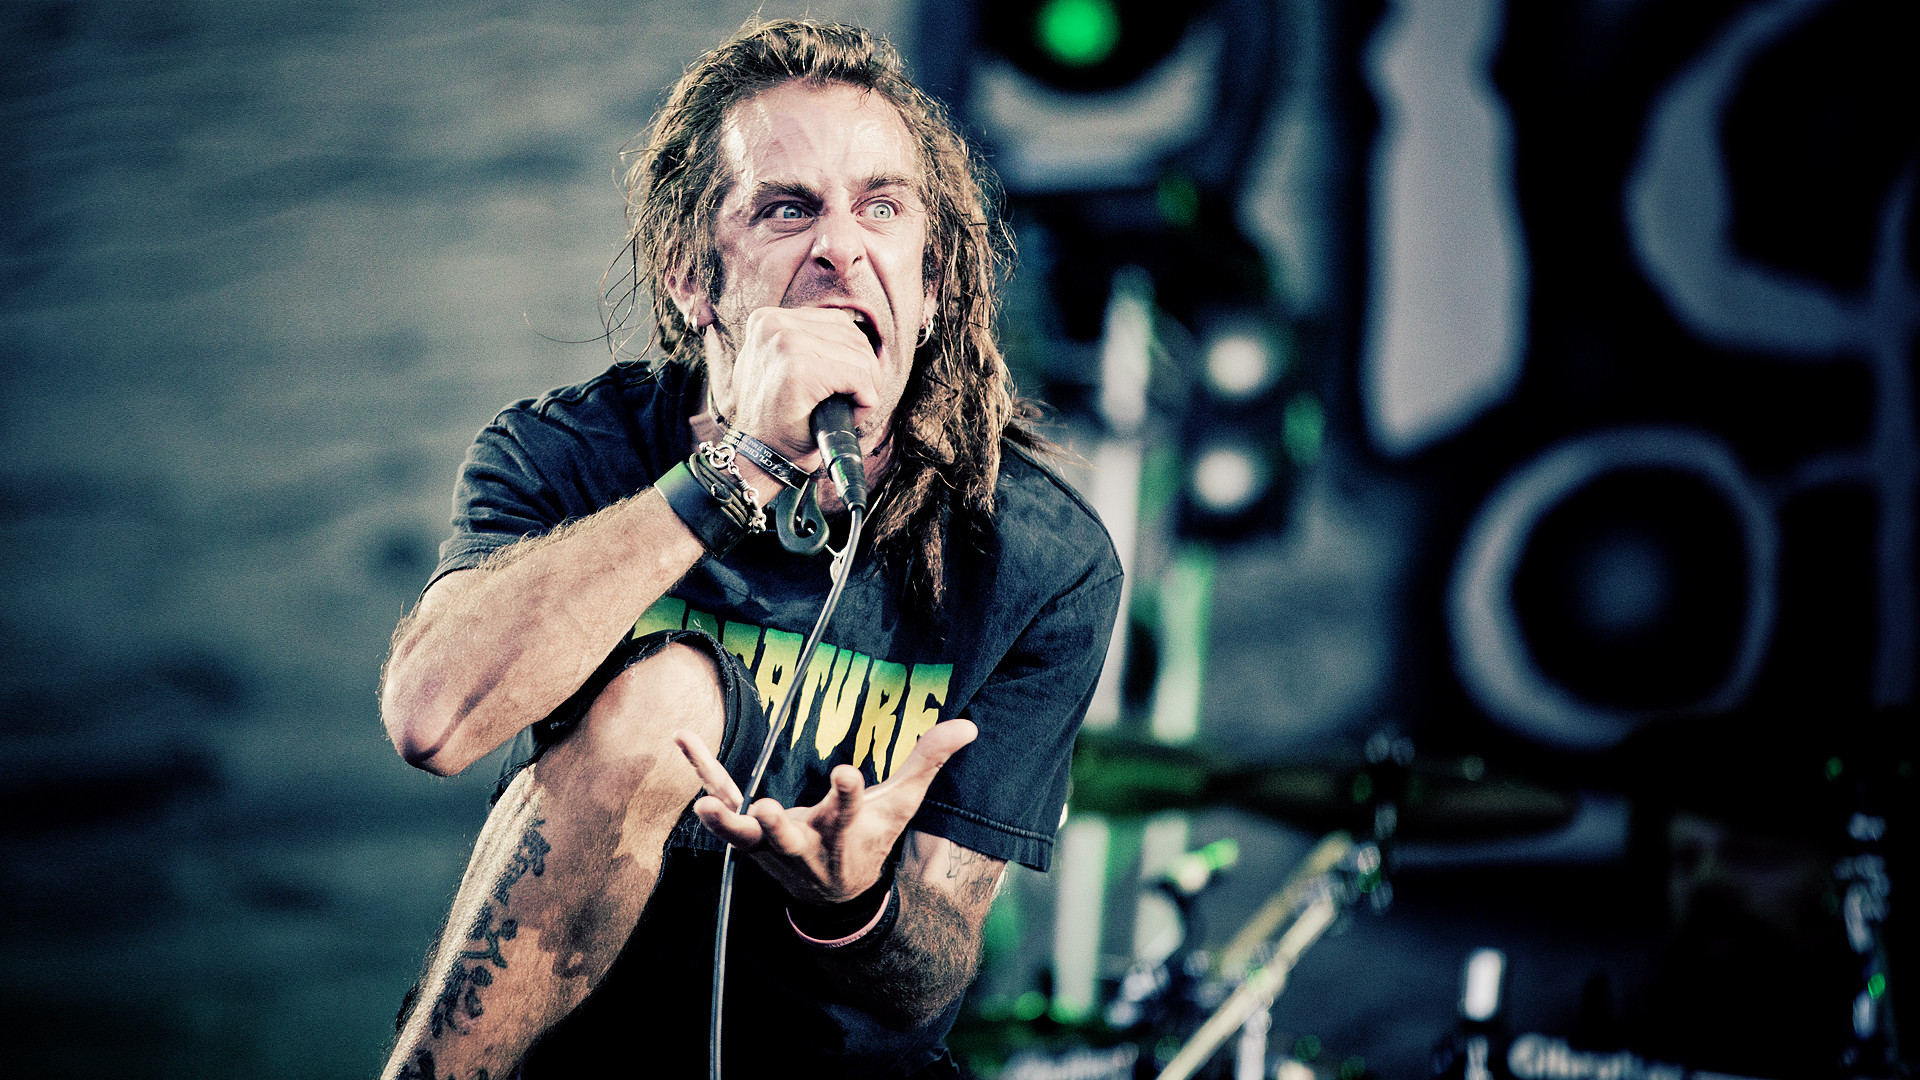 1920x1080 Lamb of God's Randy Blythe weighs in on Manchester bombing | Metal Insider